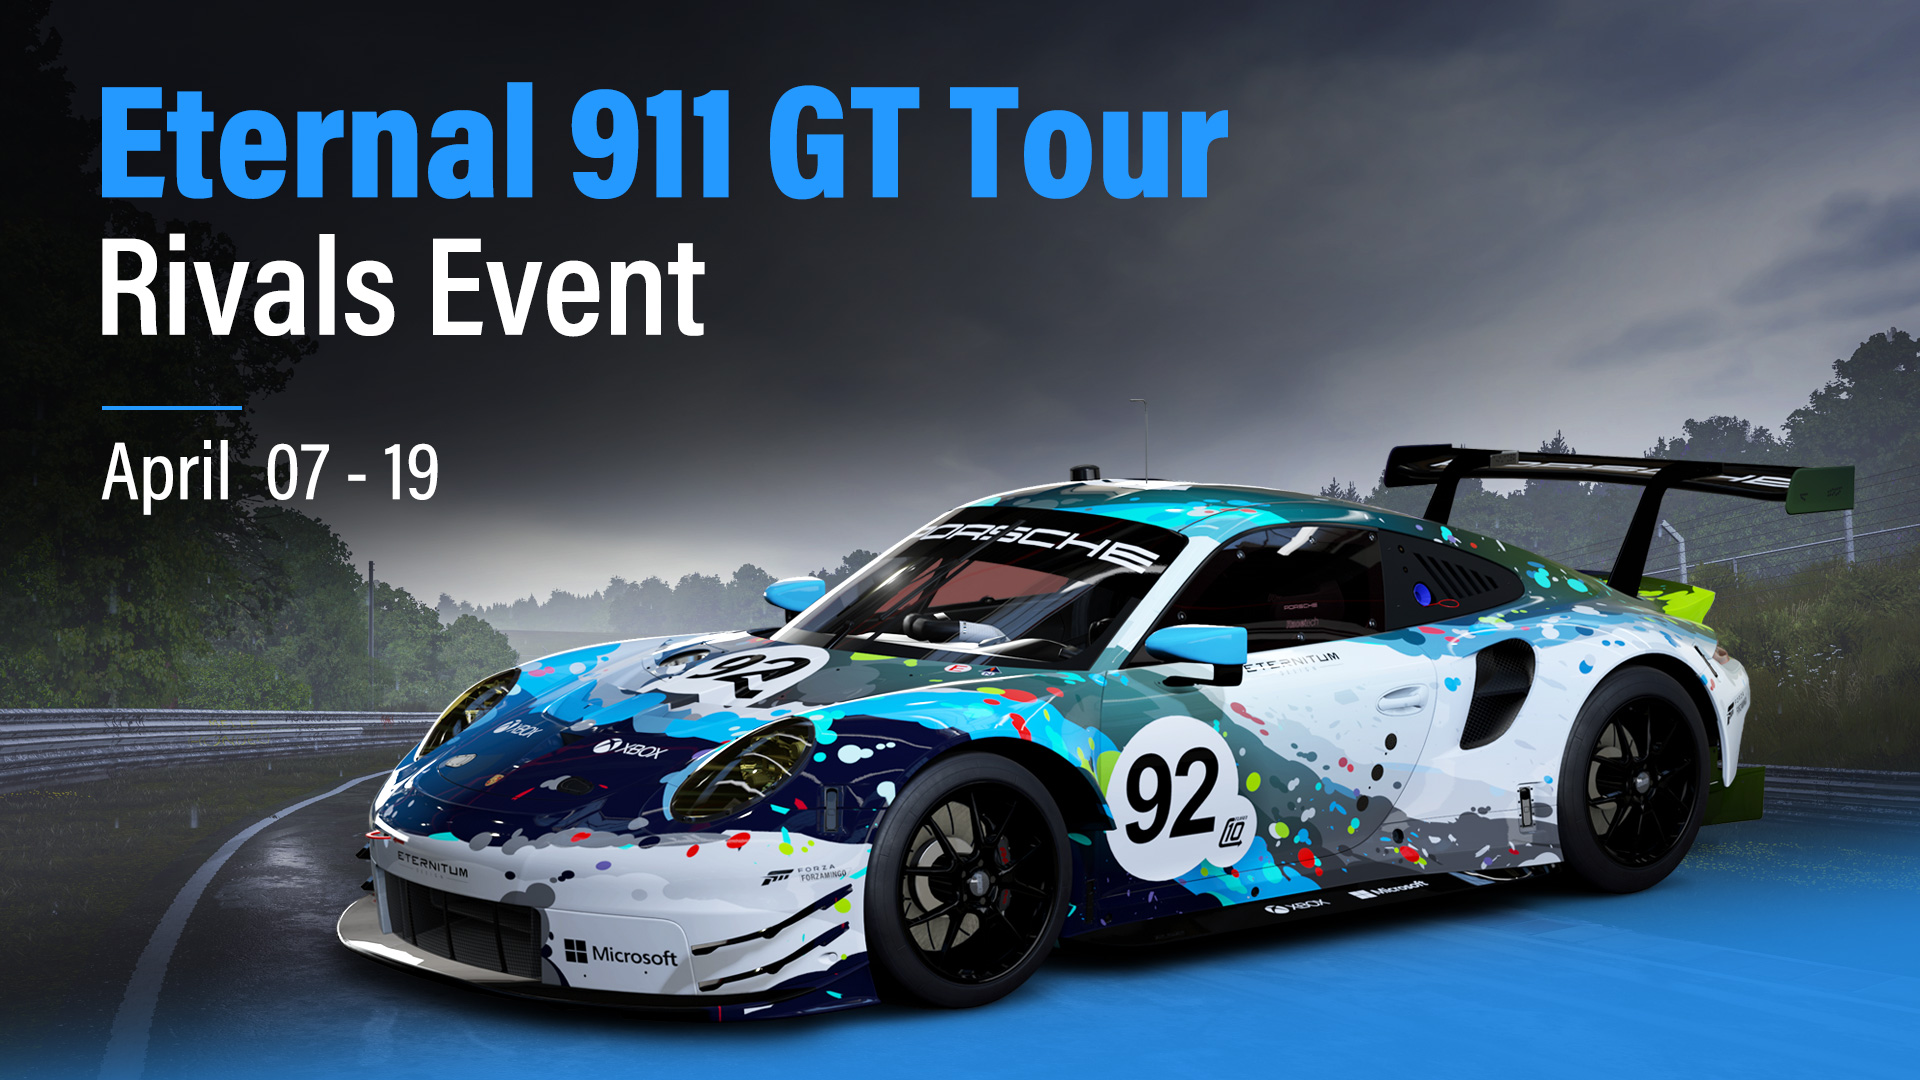 Forza Motorsport on X: Starting April 7, join our #FM7 Eternal GT